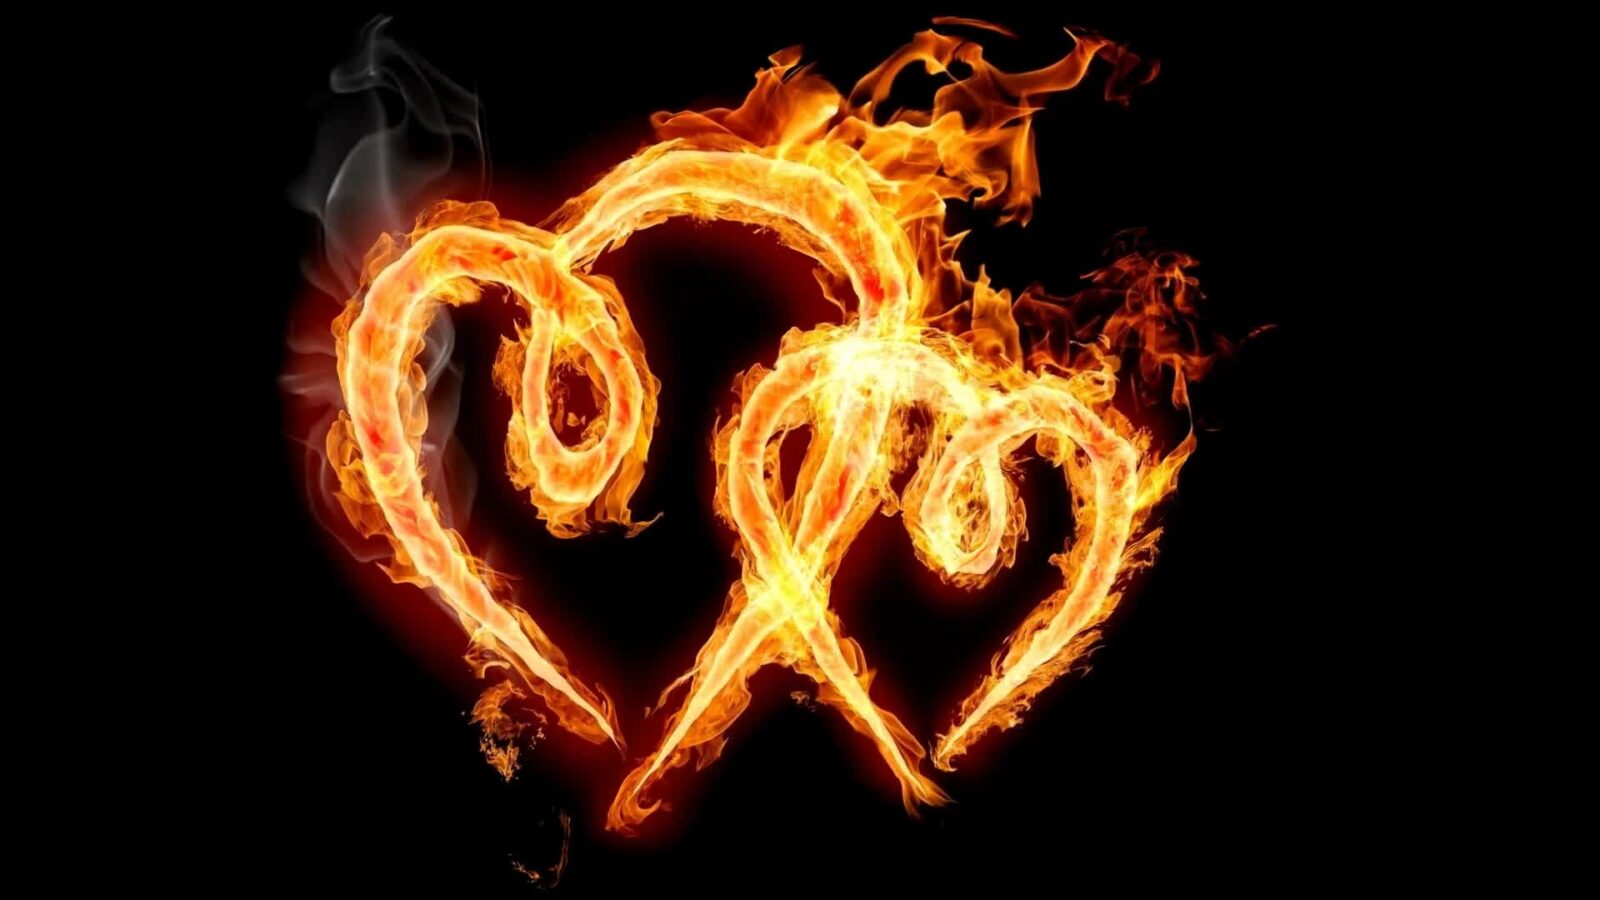 LiveWallpapers4Free.com | Heart In Flame Fantasy Love - Free Live Wallpaper